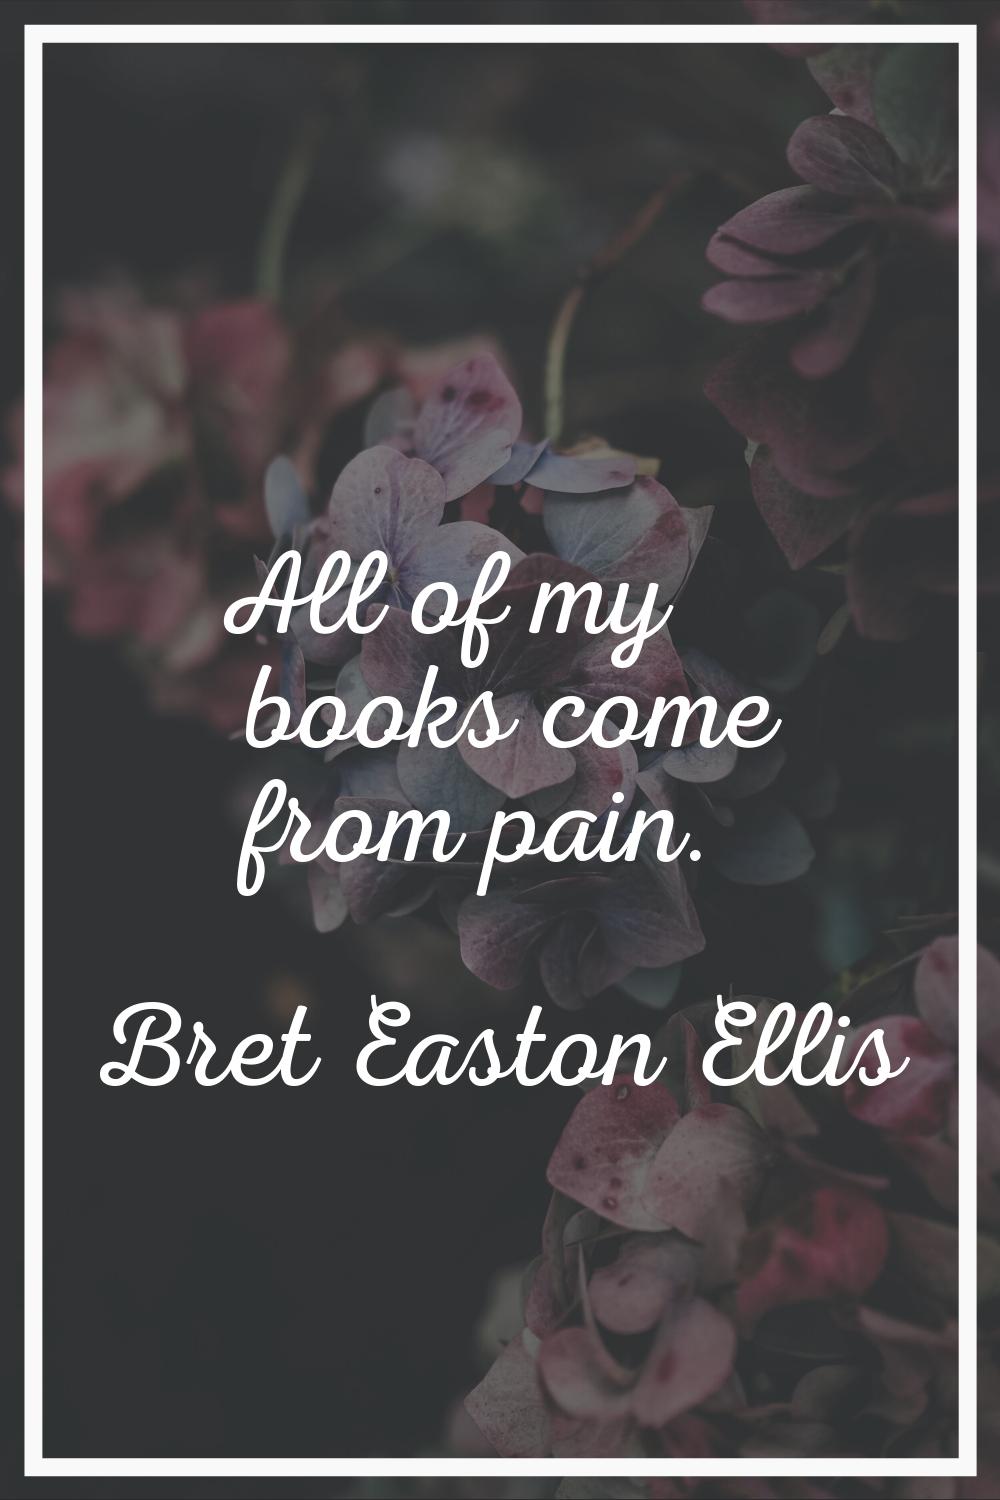 All of my books come from pain.